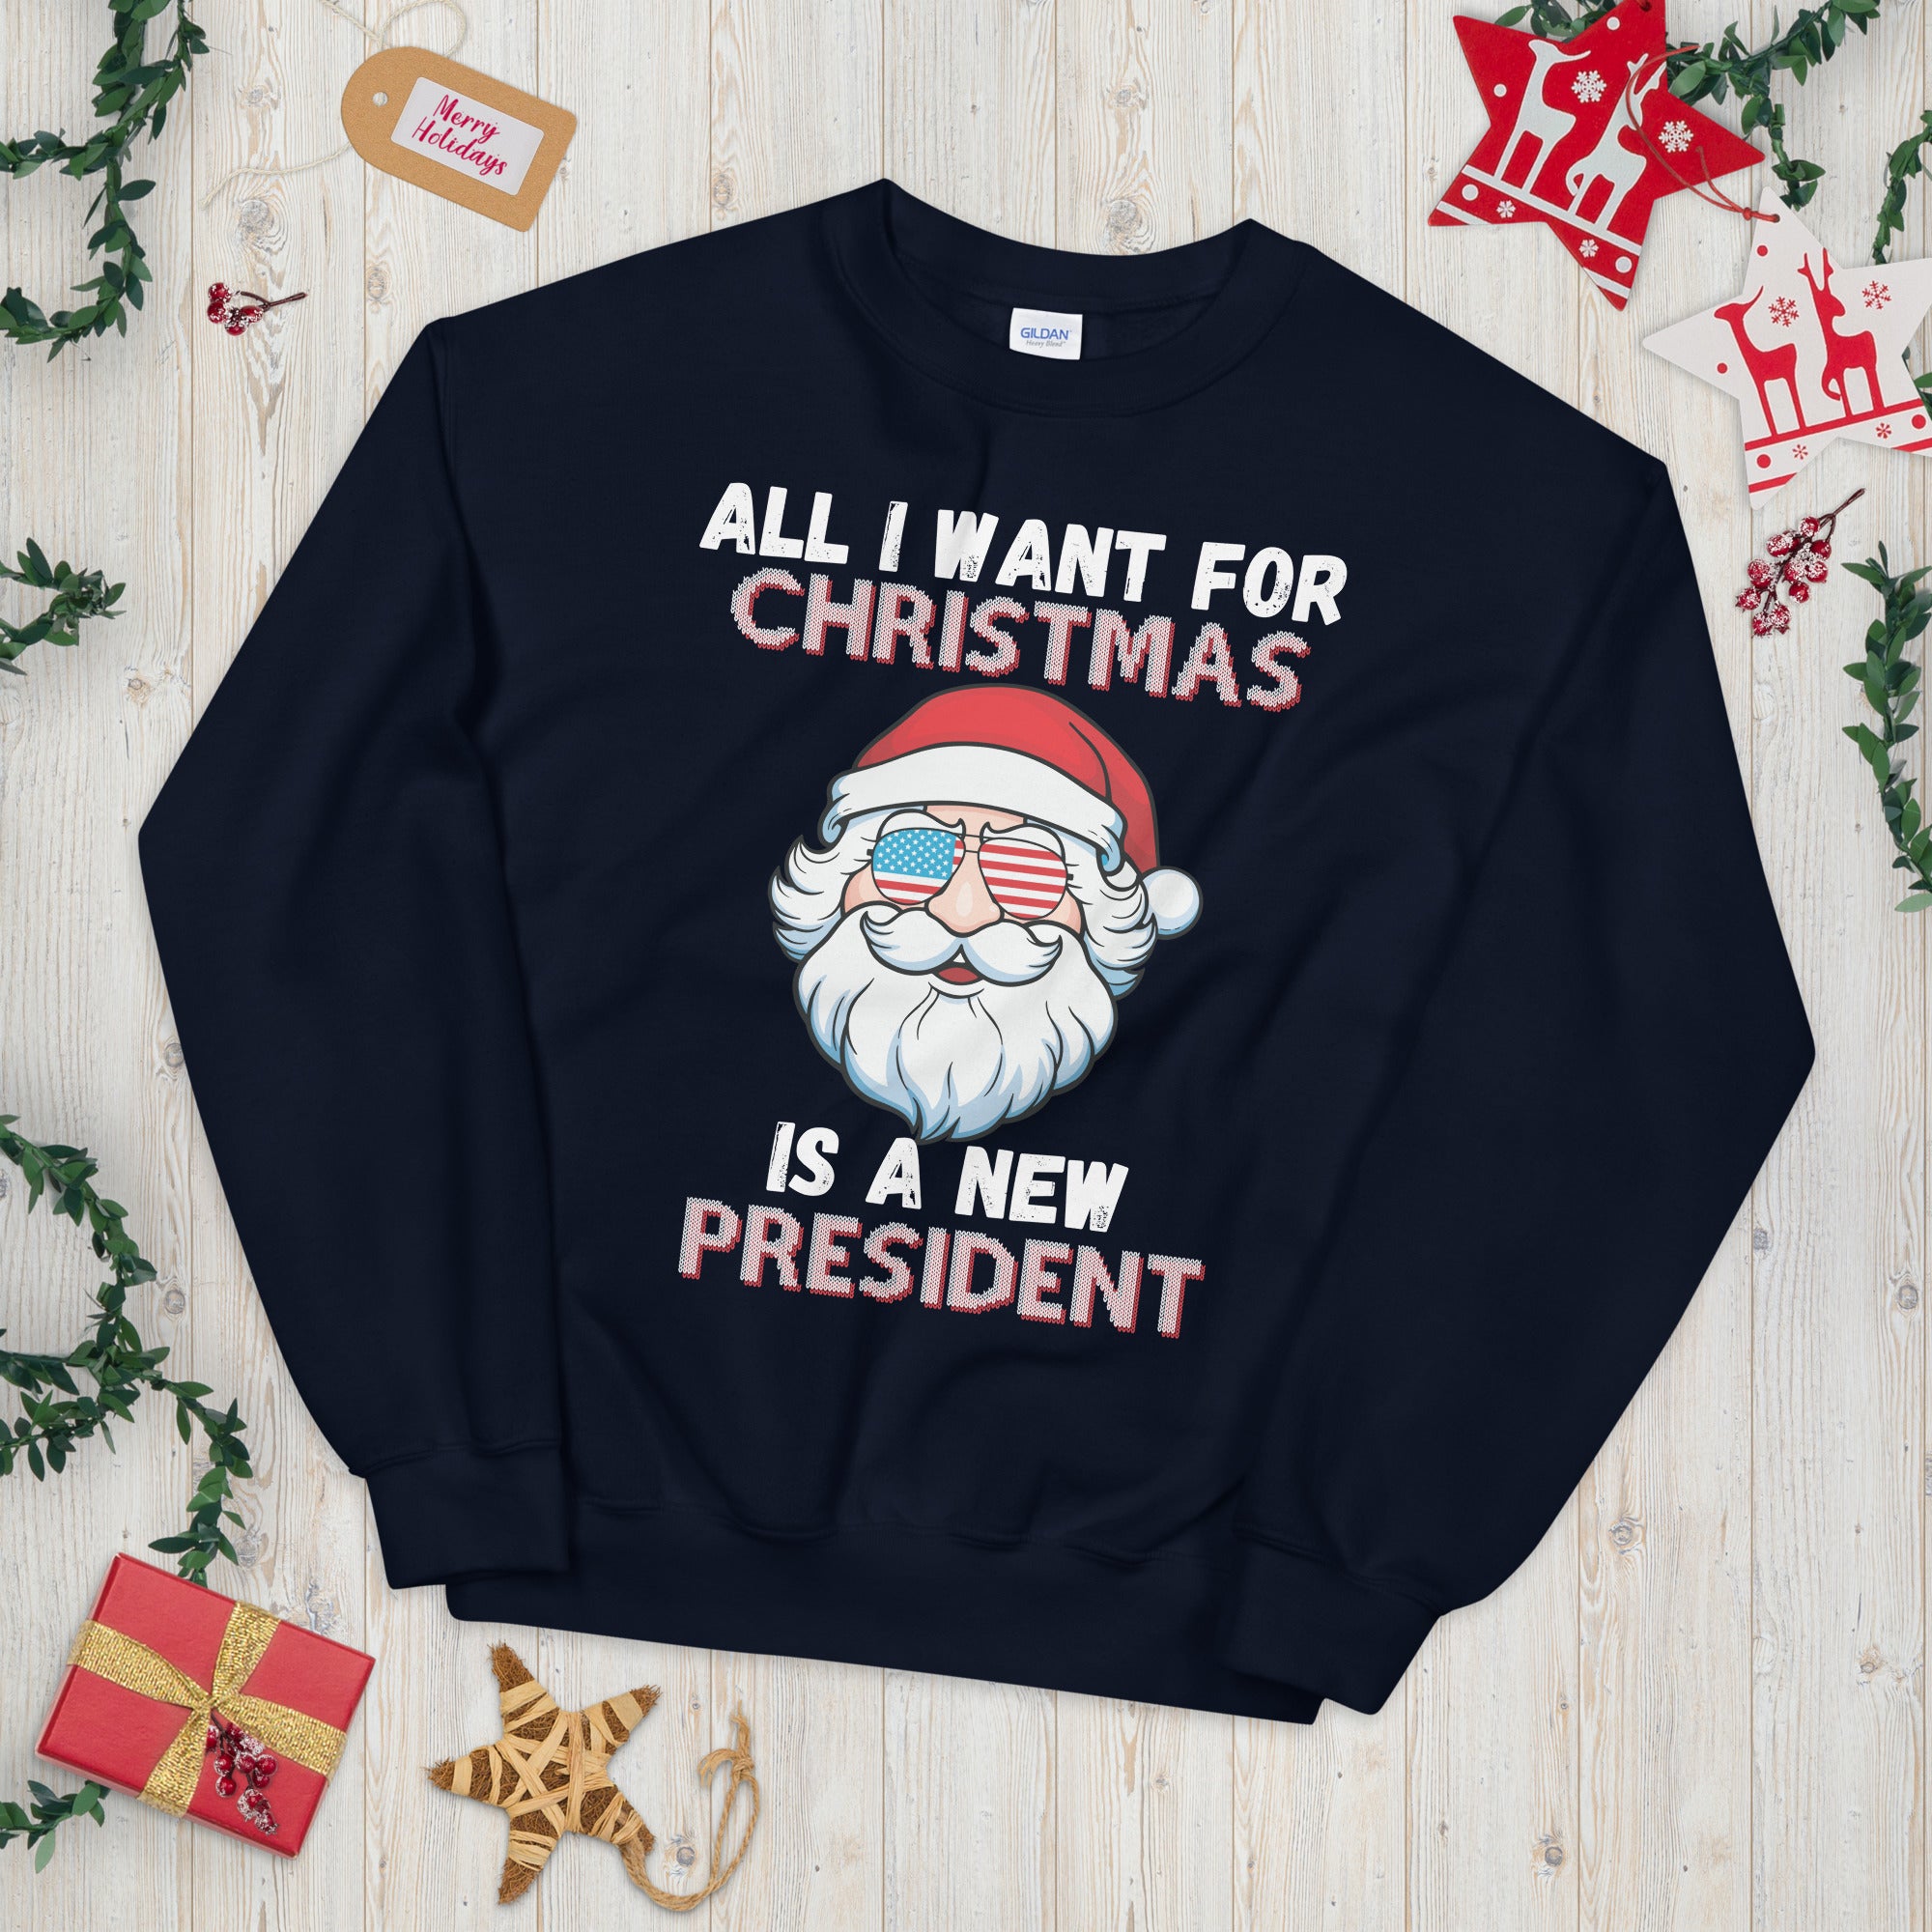 All I Want For Christmas Is A New President, Republican Christmas Sweater, Xmas Conservative Shirt, Anti Biden Sweatshirt, FJB Christmas Tee - Madeinsea©